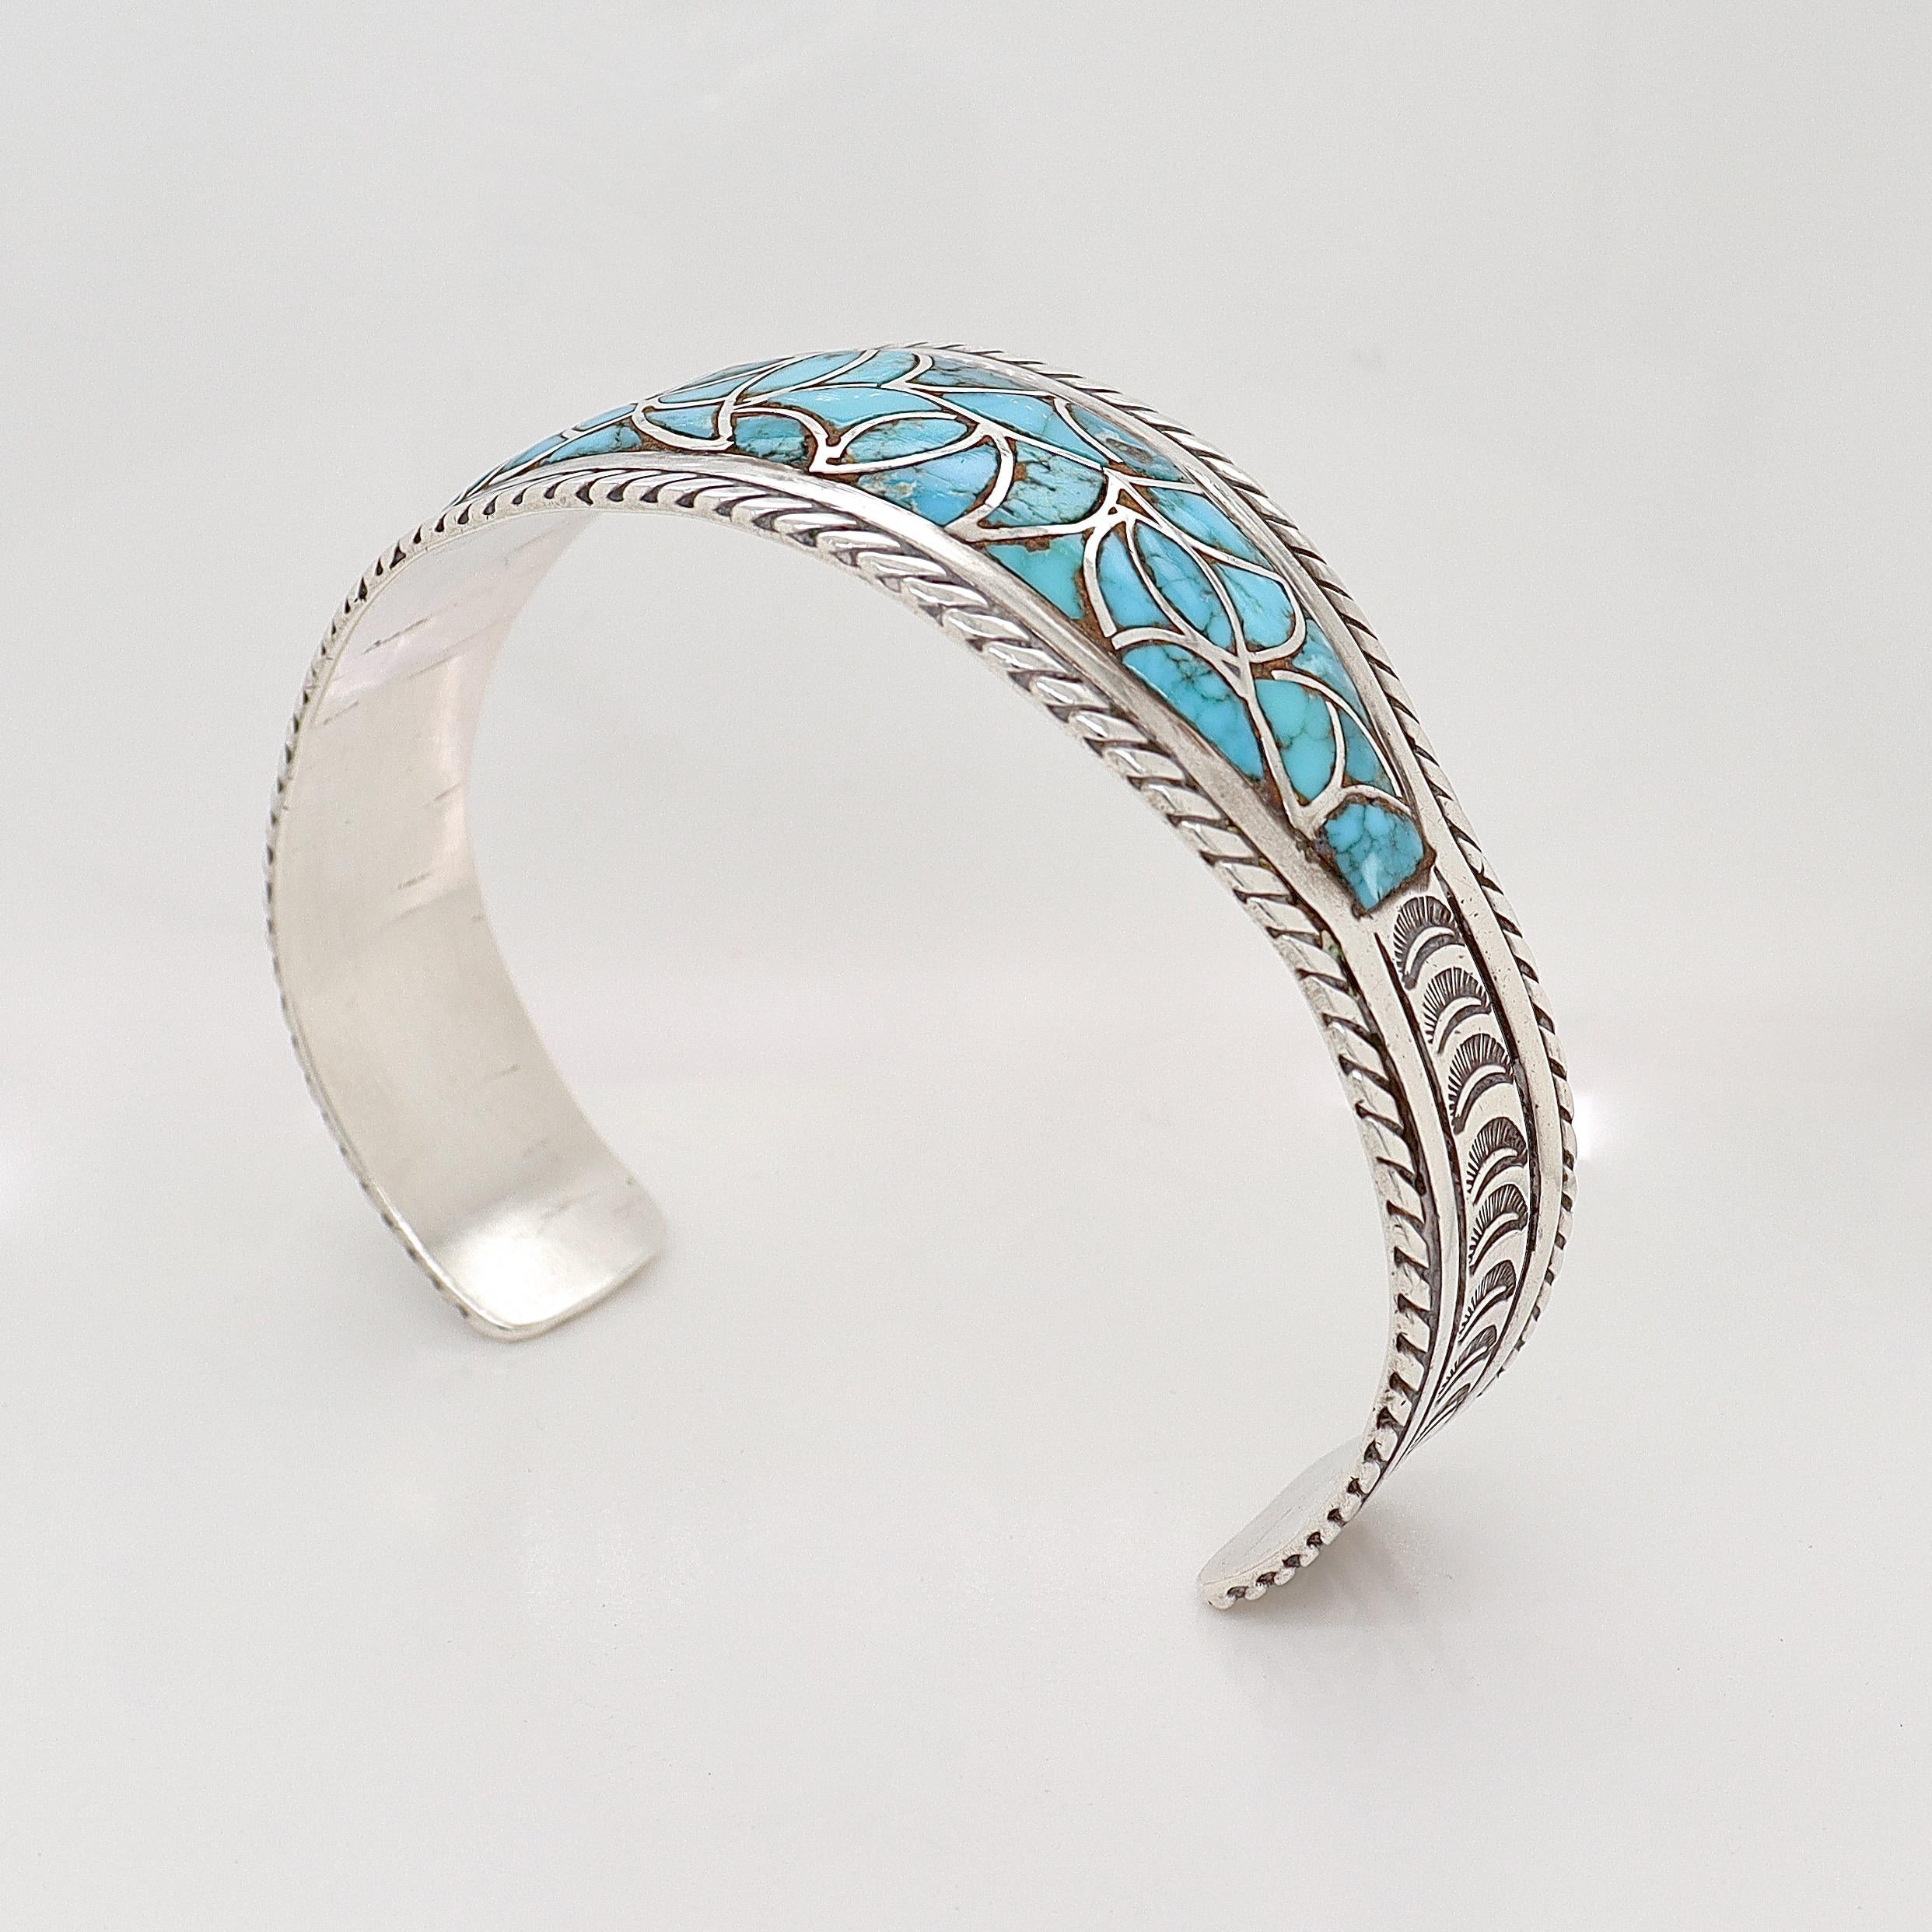 vintage silver and turquoise bracelet